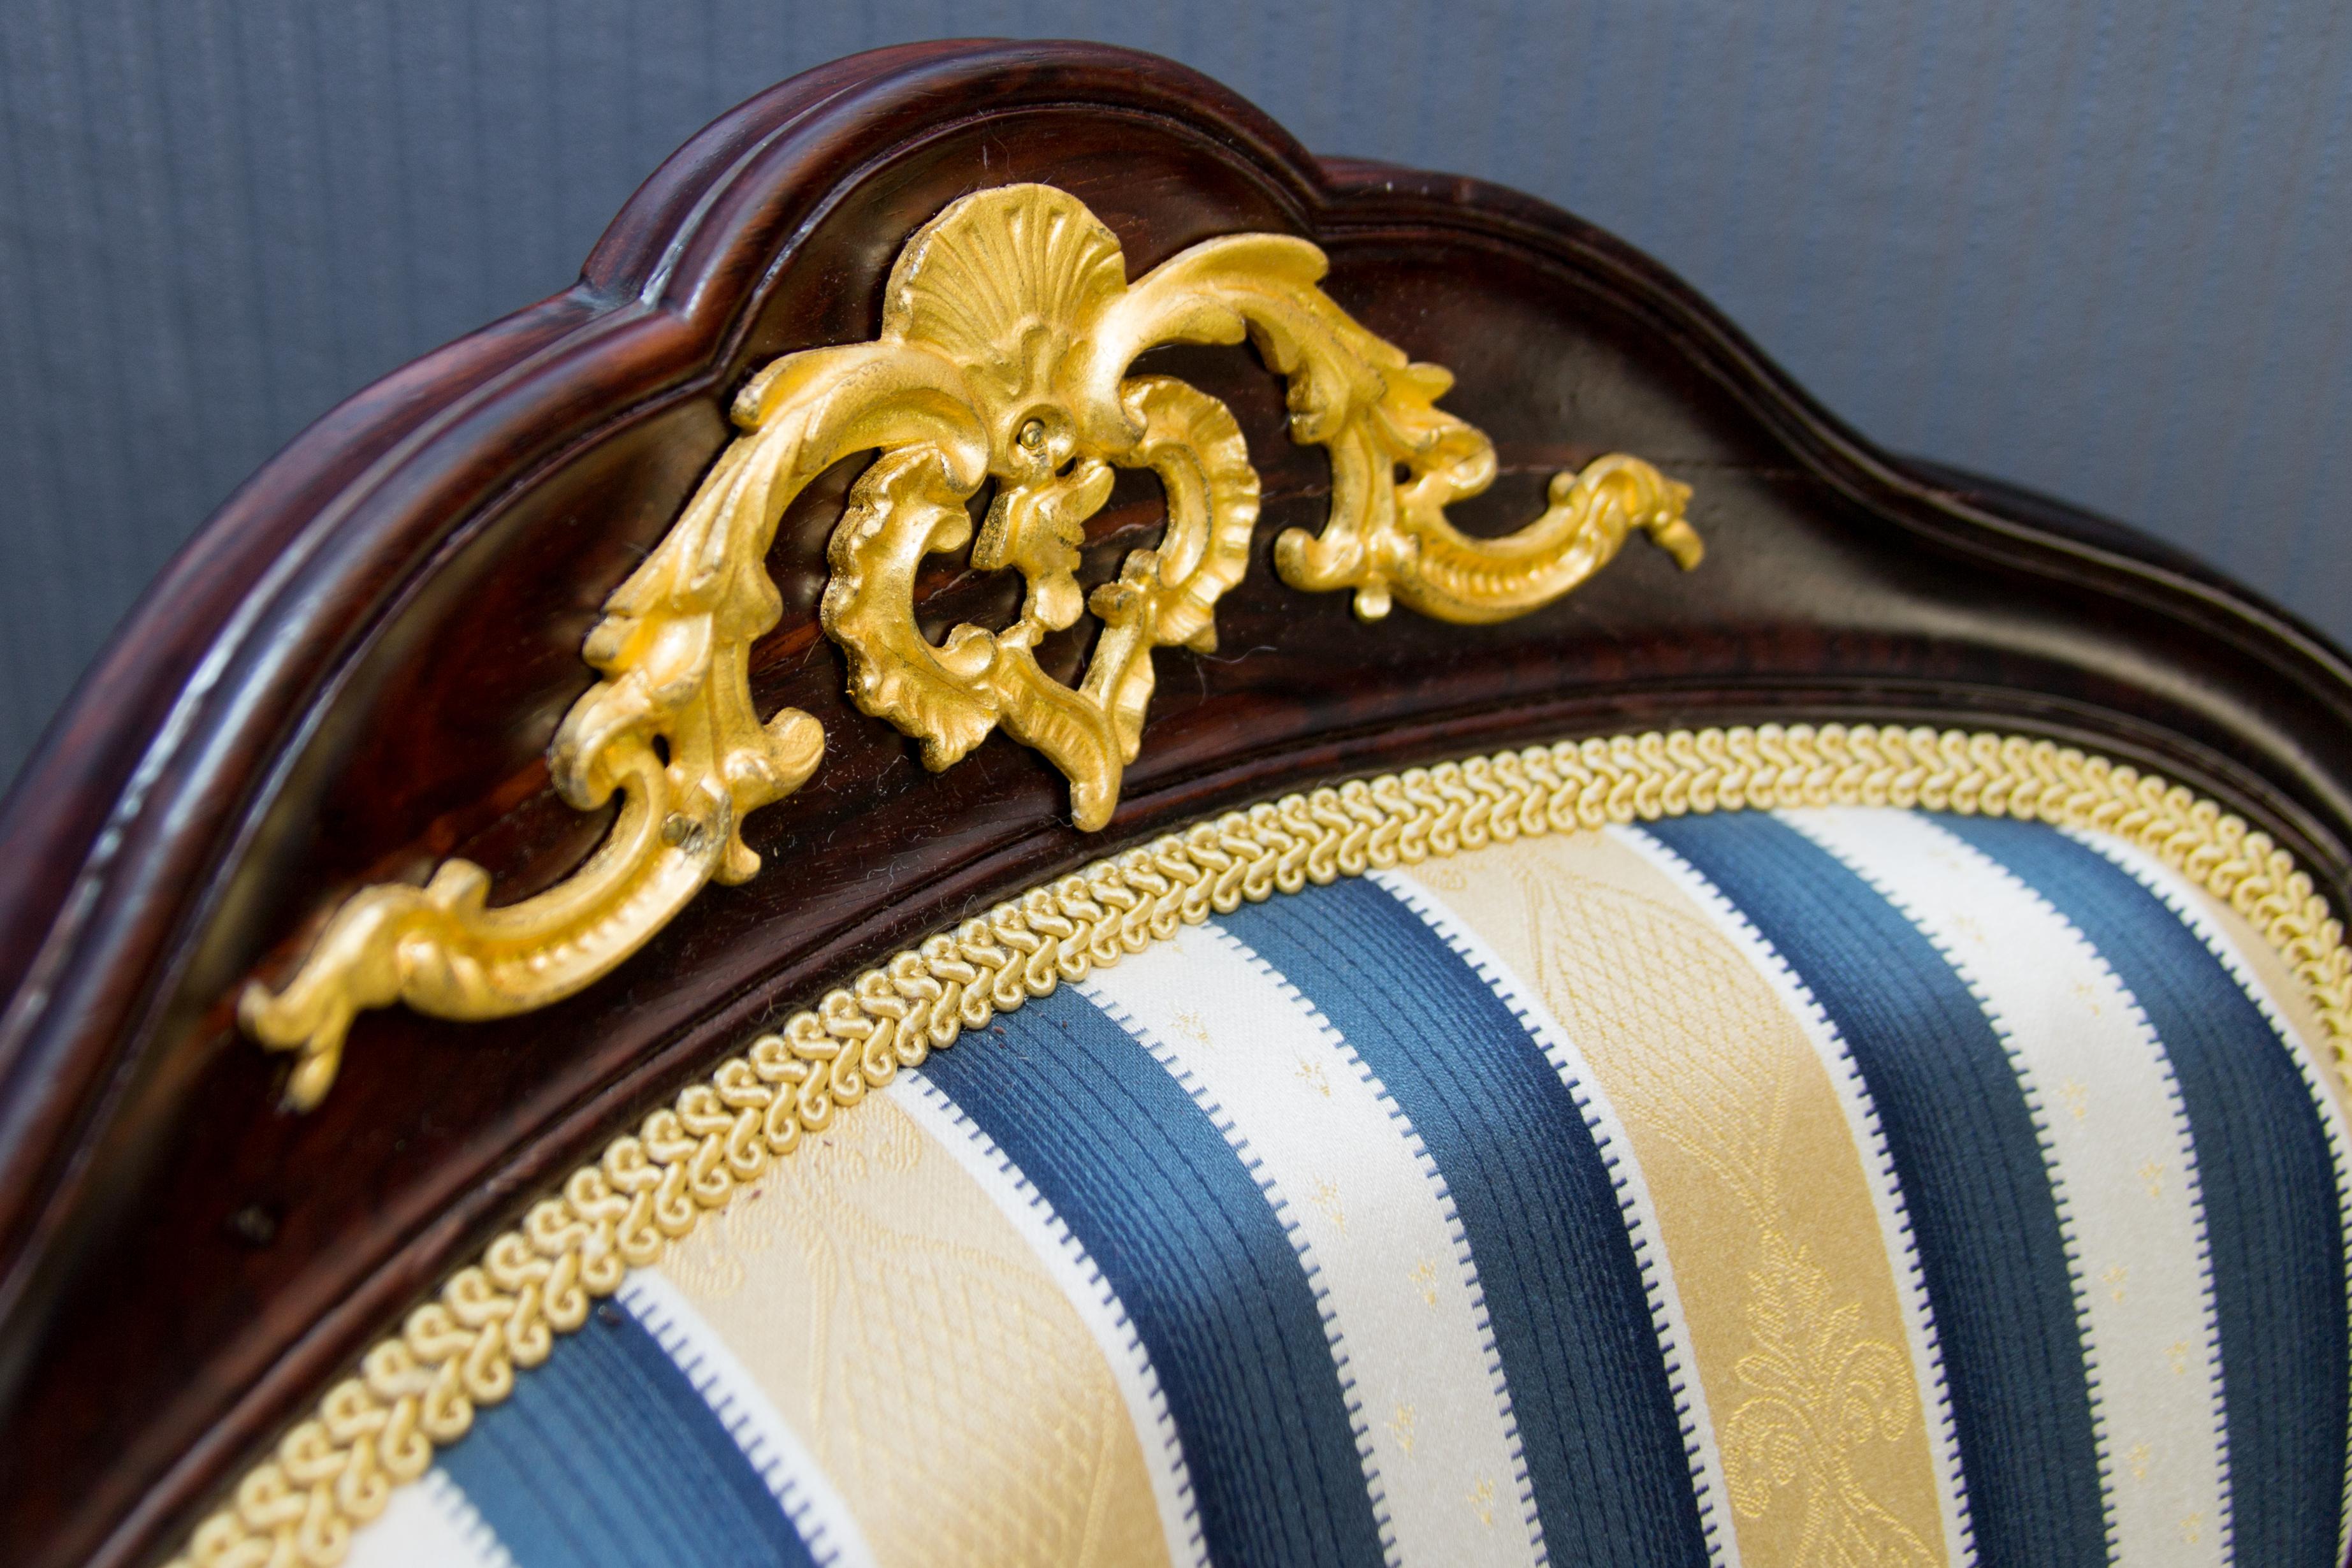 Gilt Pair of 19th Century Louis XV Style Walnut Armchairs in Golden, Blue, and White  For Sale